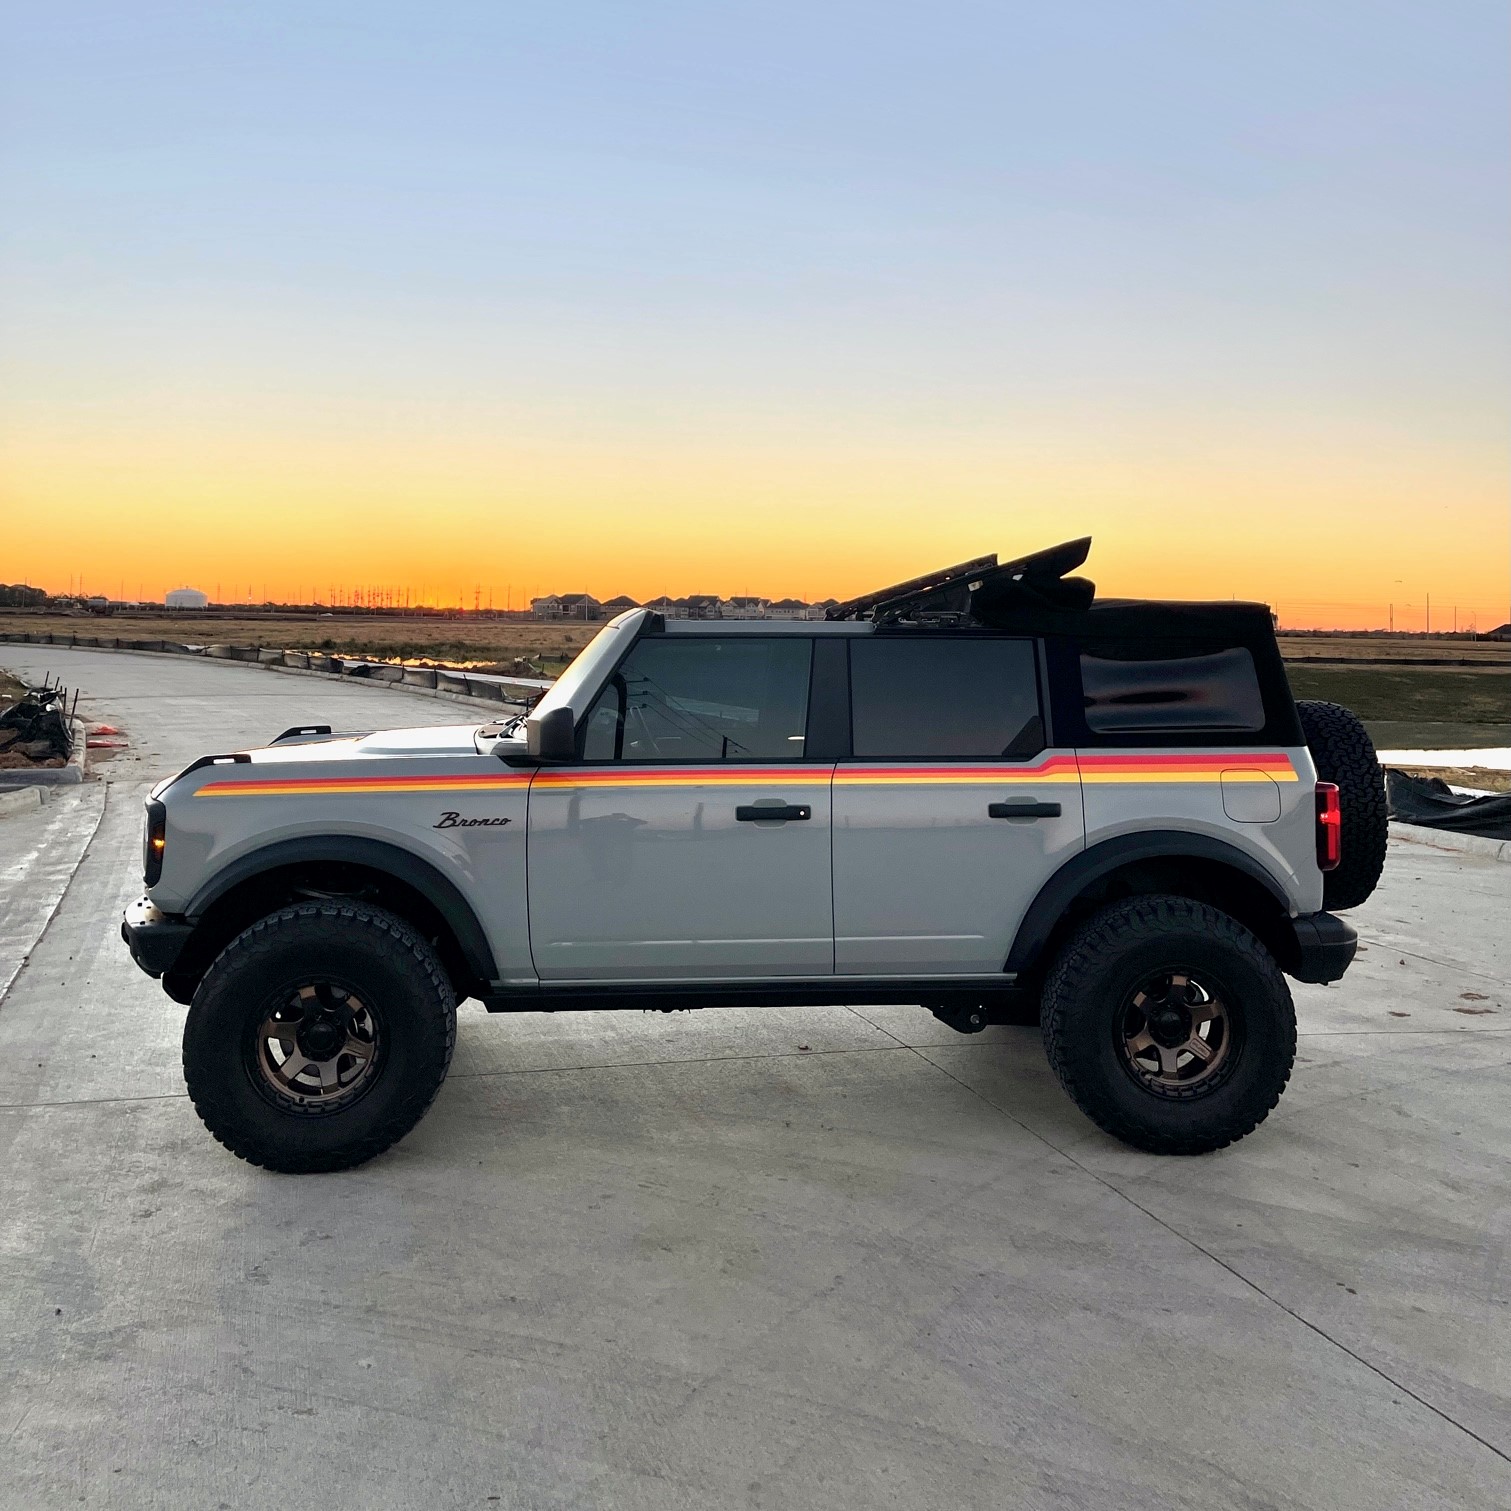 Ford Bronco Let's See Those Sunset Bronco Photos!! greg sunset 01